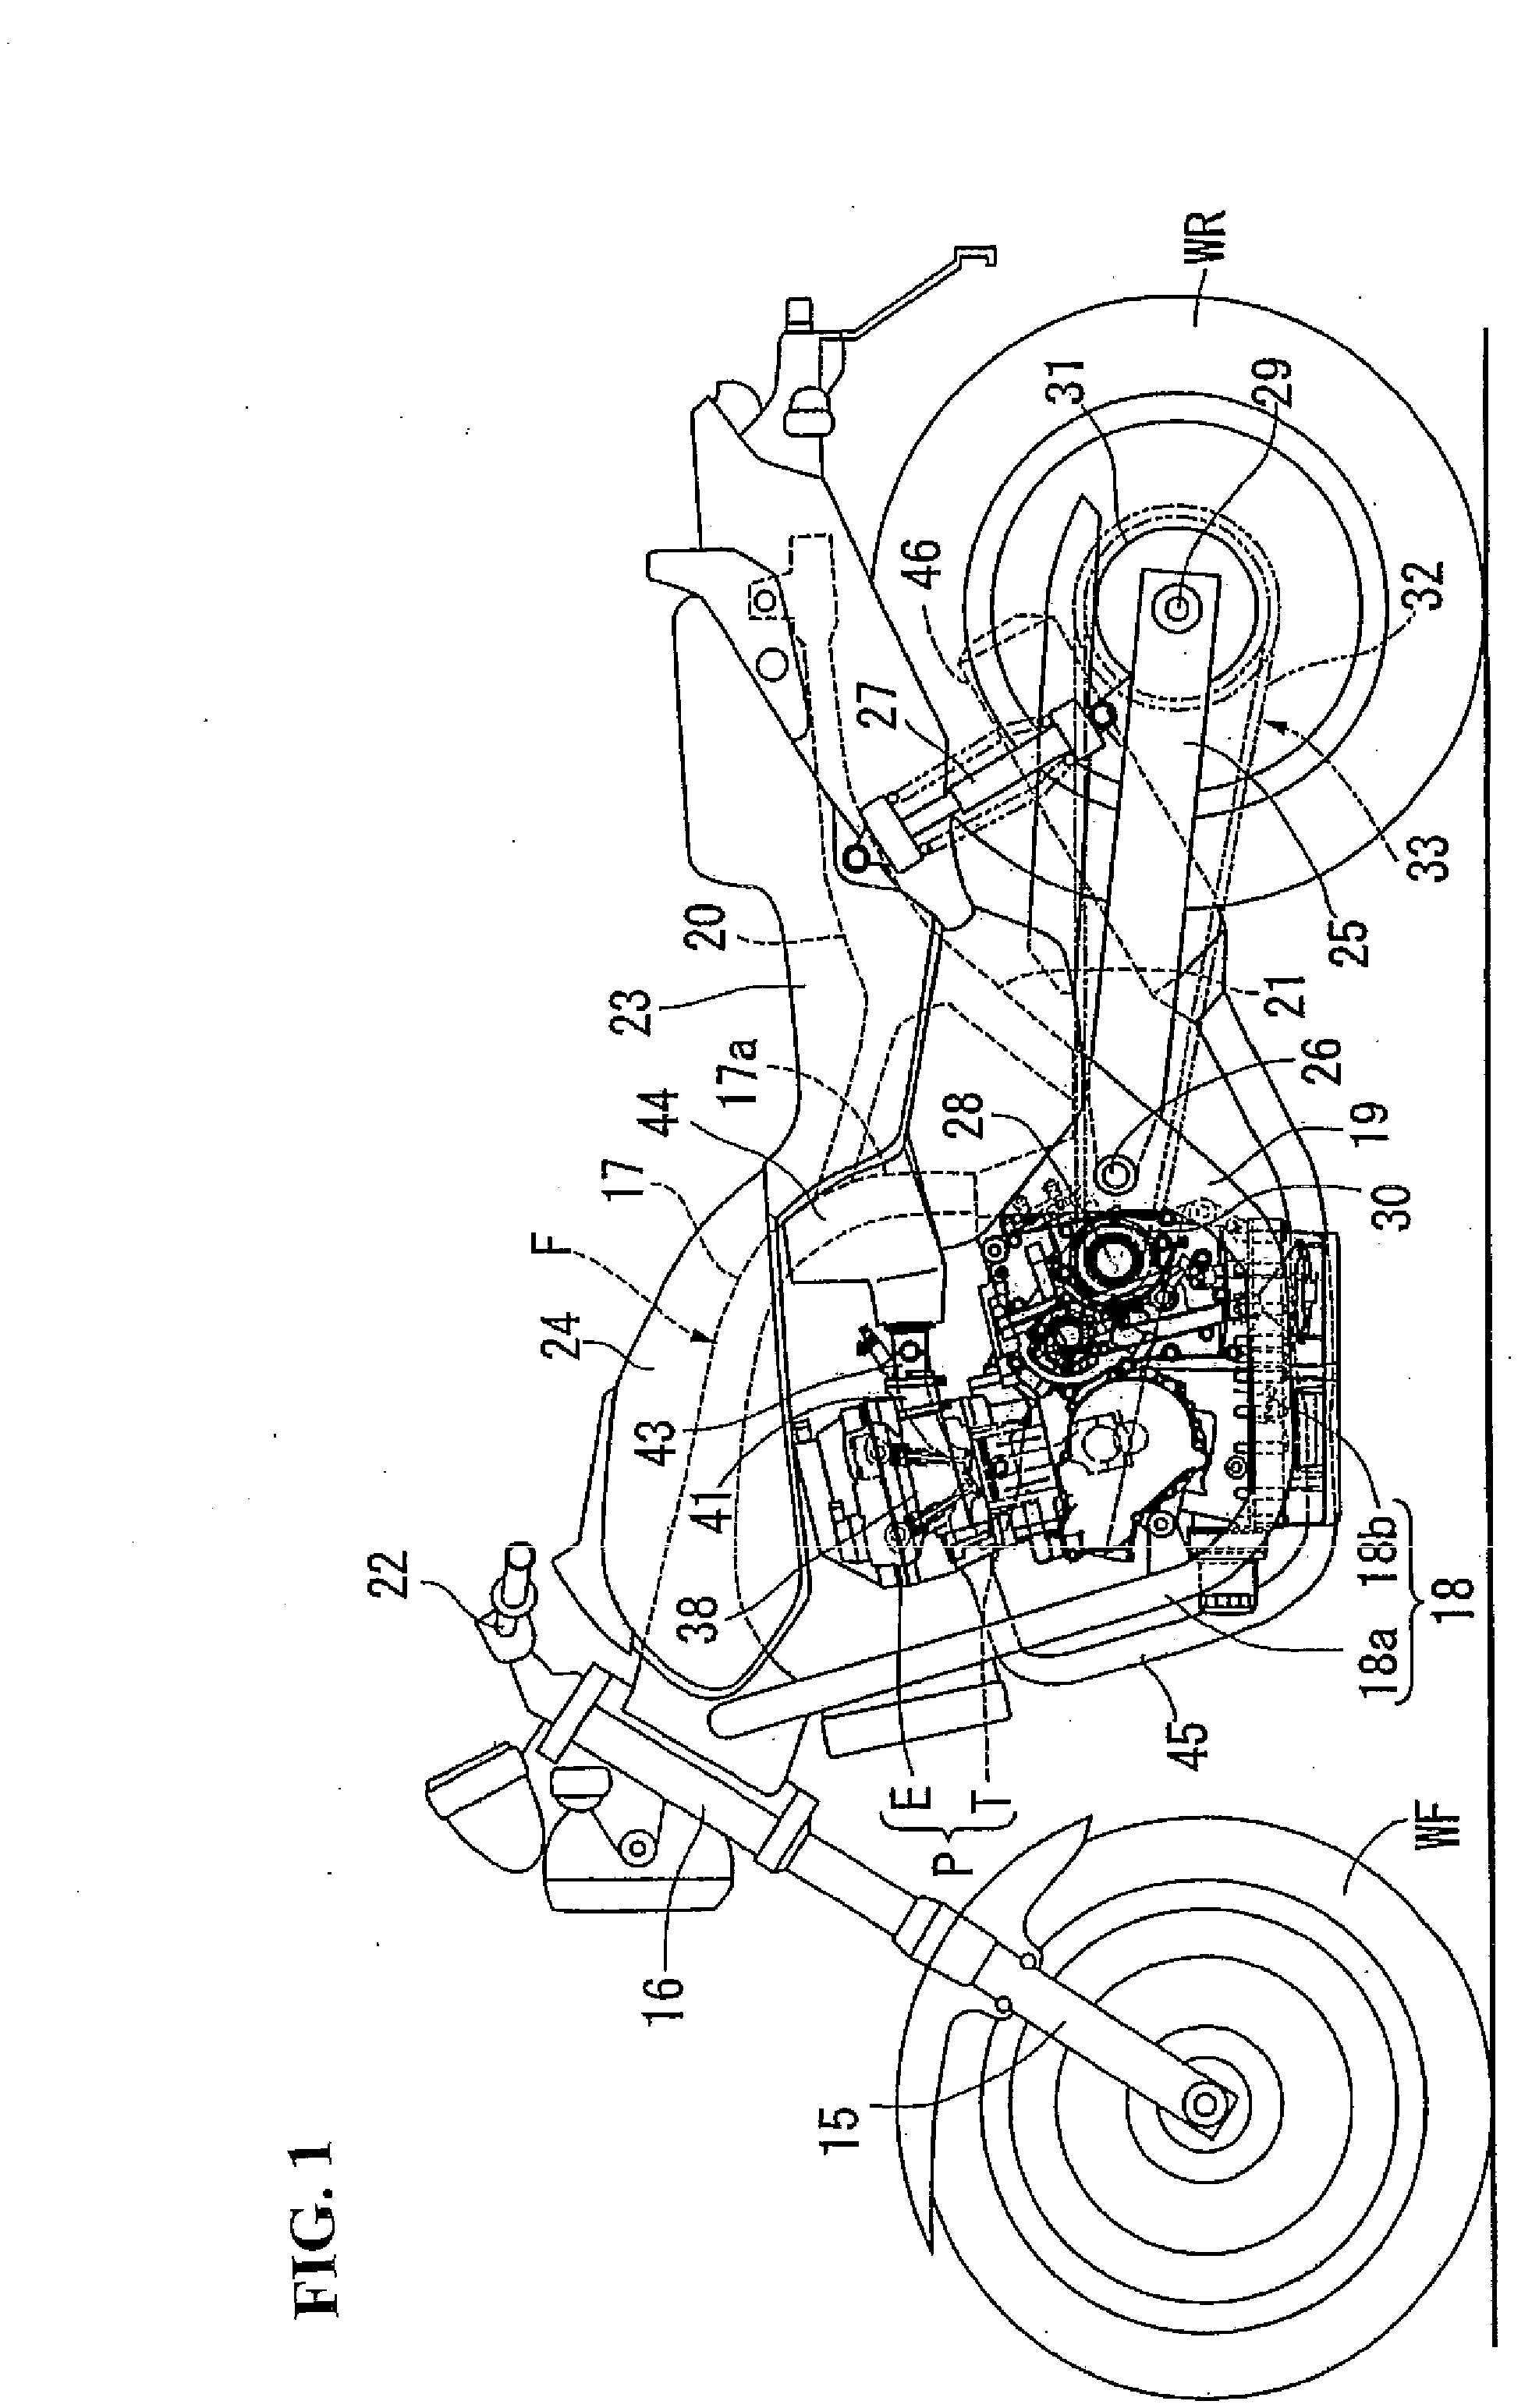 Power unit for motorcycle